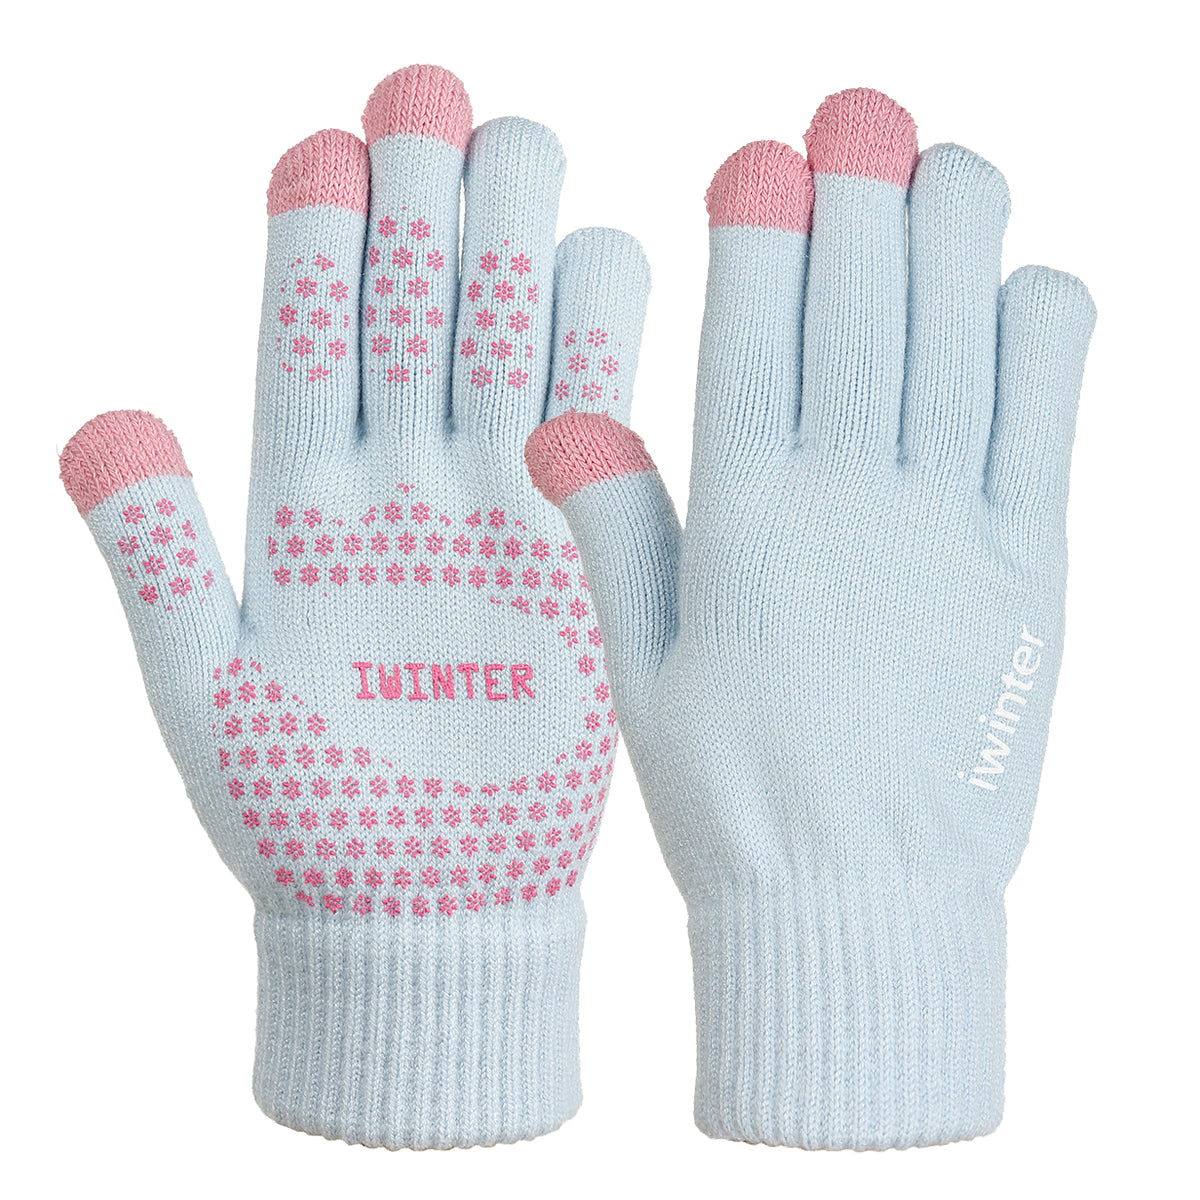 Light Gray Knitted Touch Screen Outdoor Gloves Motorcycle Winter Warm Windproof Fleece Lined Thermal Non-slip